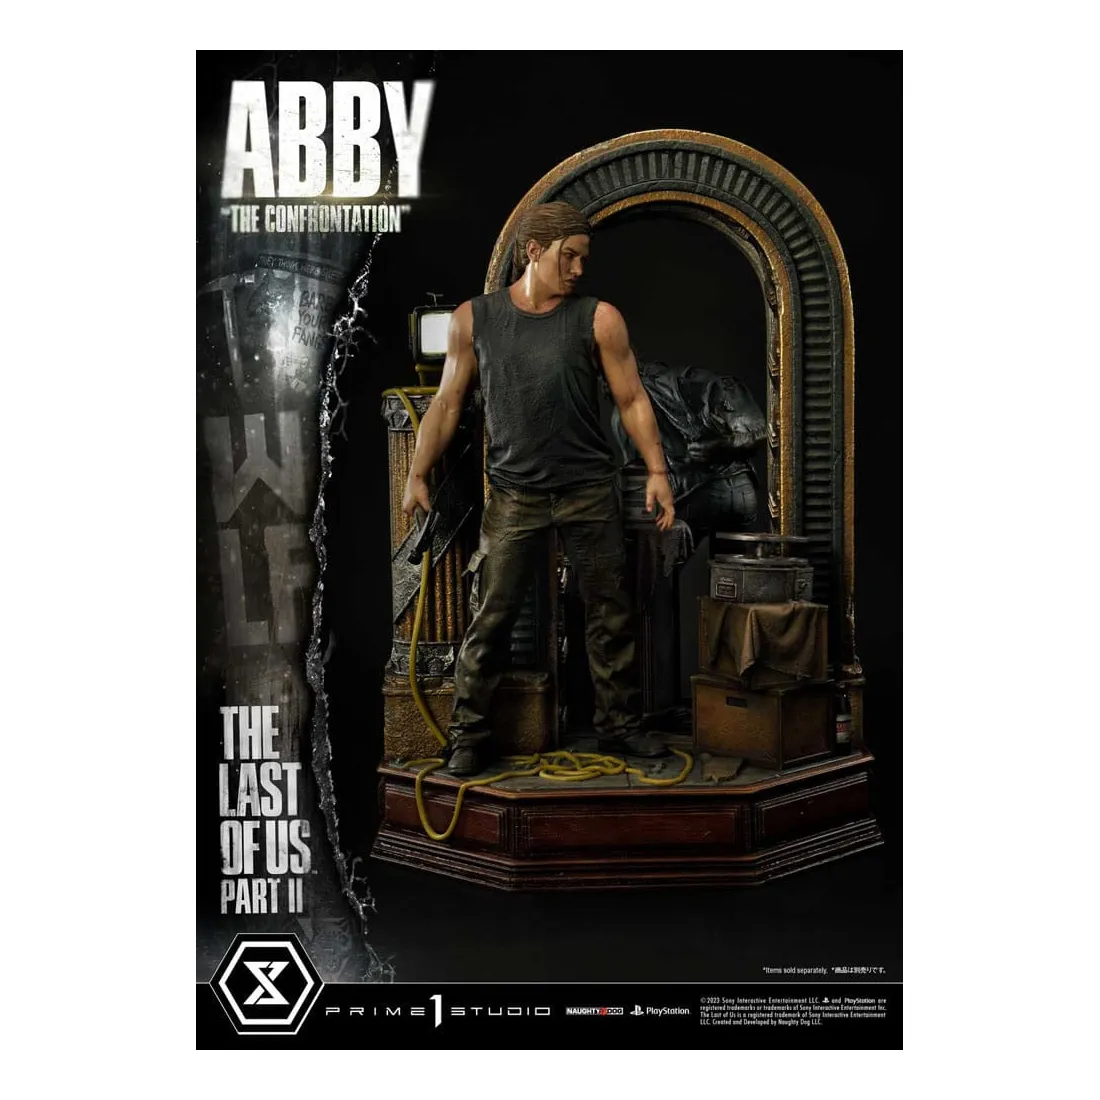 Ultimate Premium Masterline The Last of Us Part II Abby The